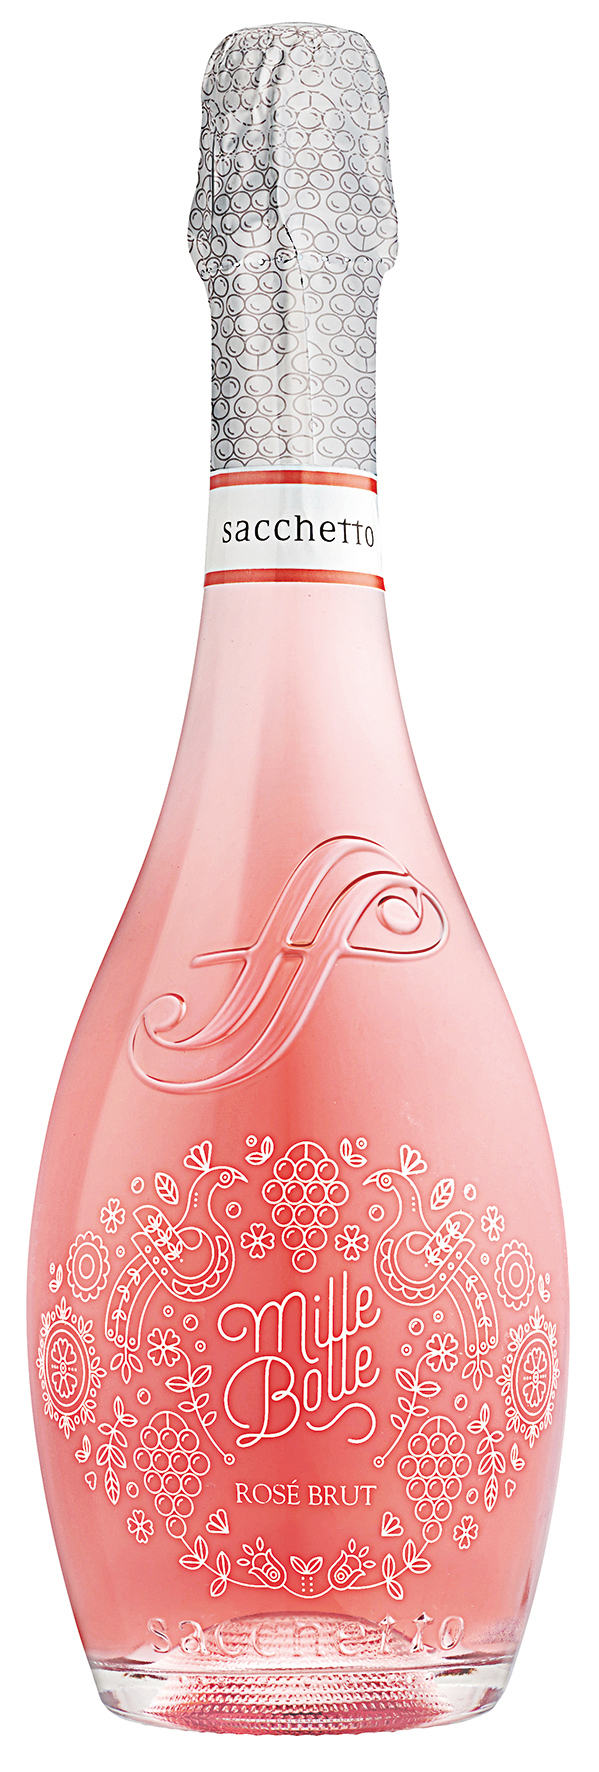 sacchetto_mille_bolle_spumante_brut_rose